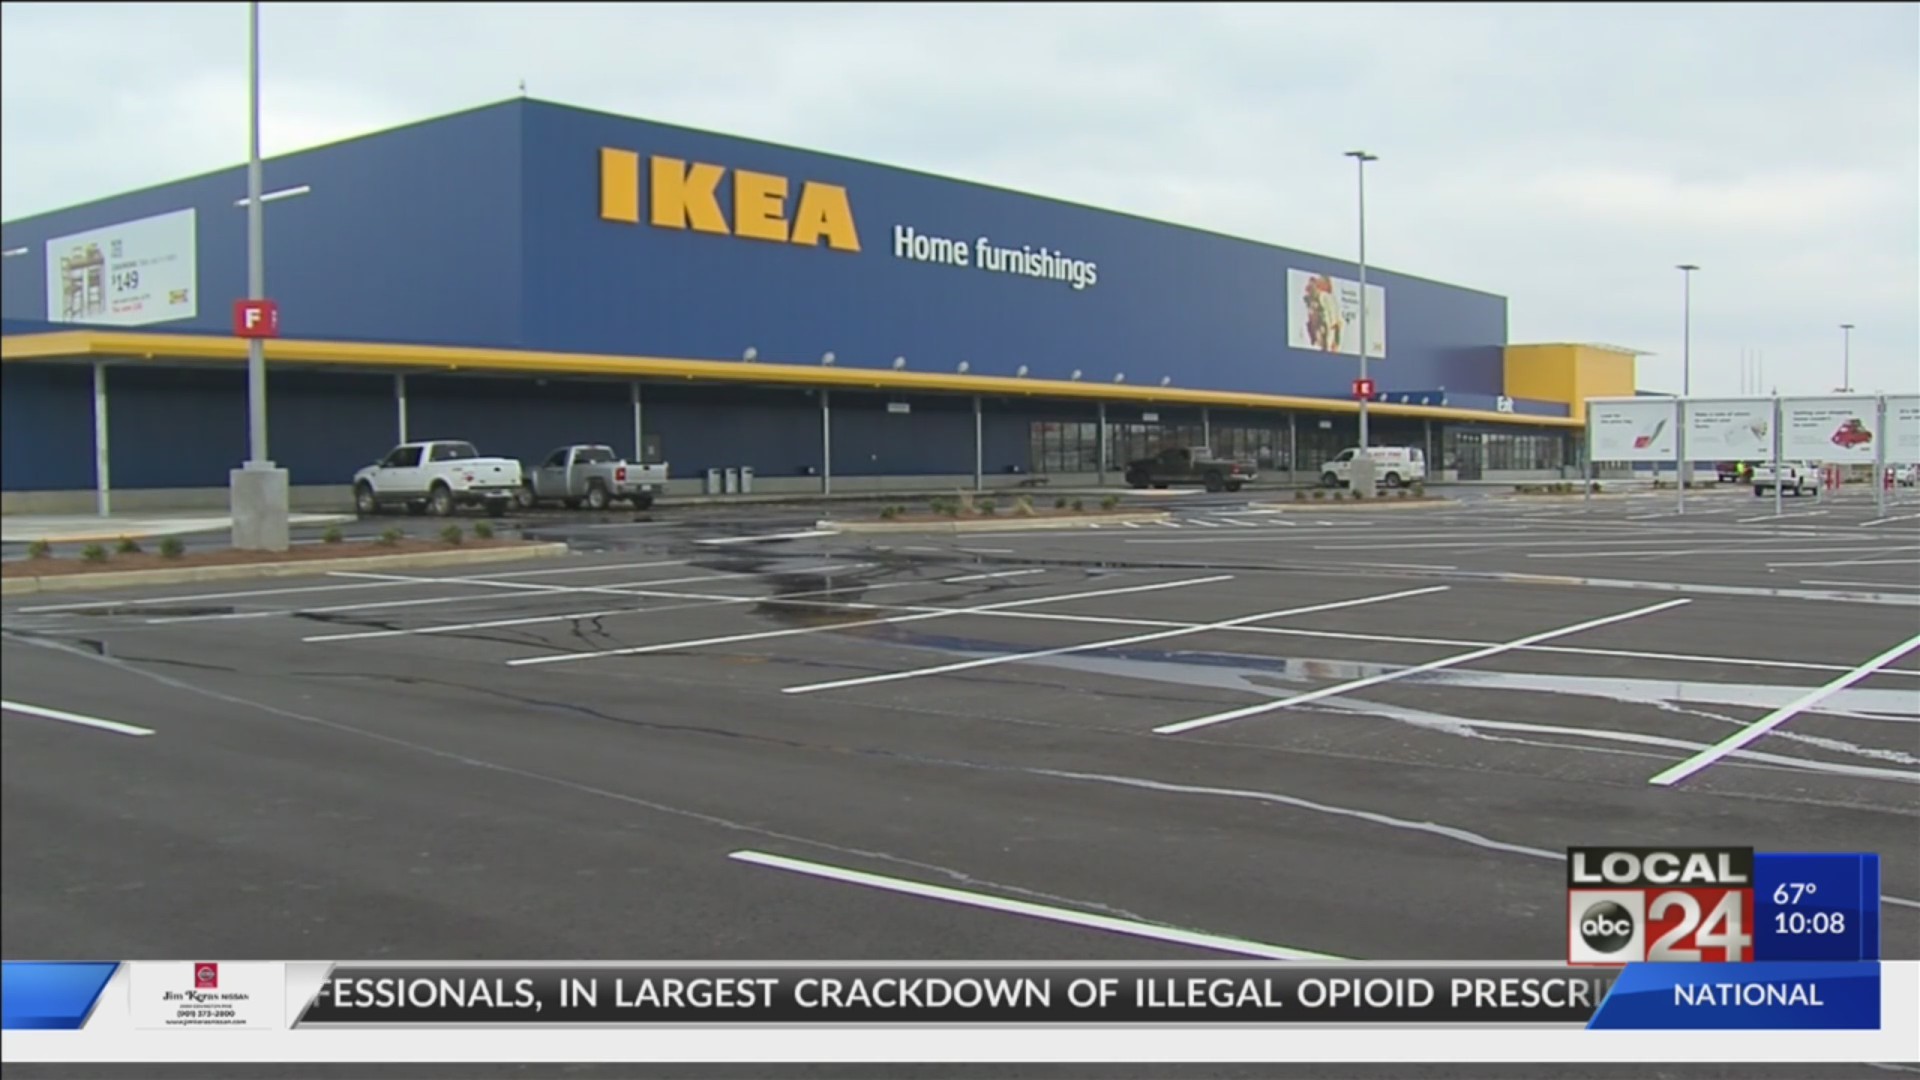 IKEA gives back tax breaks after falling short of requirements